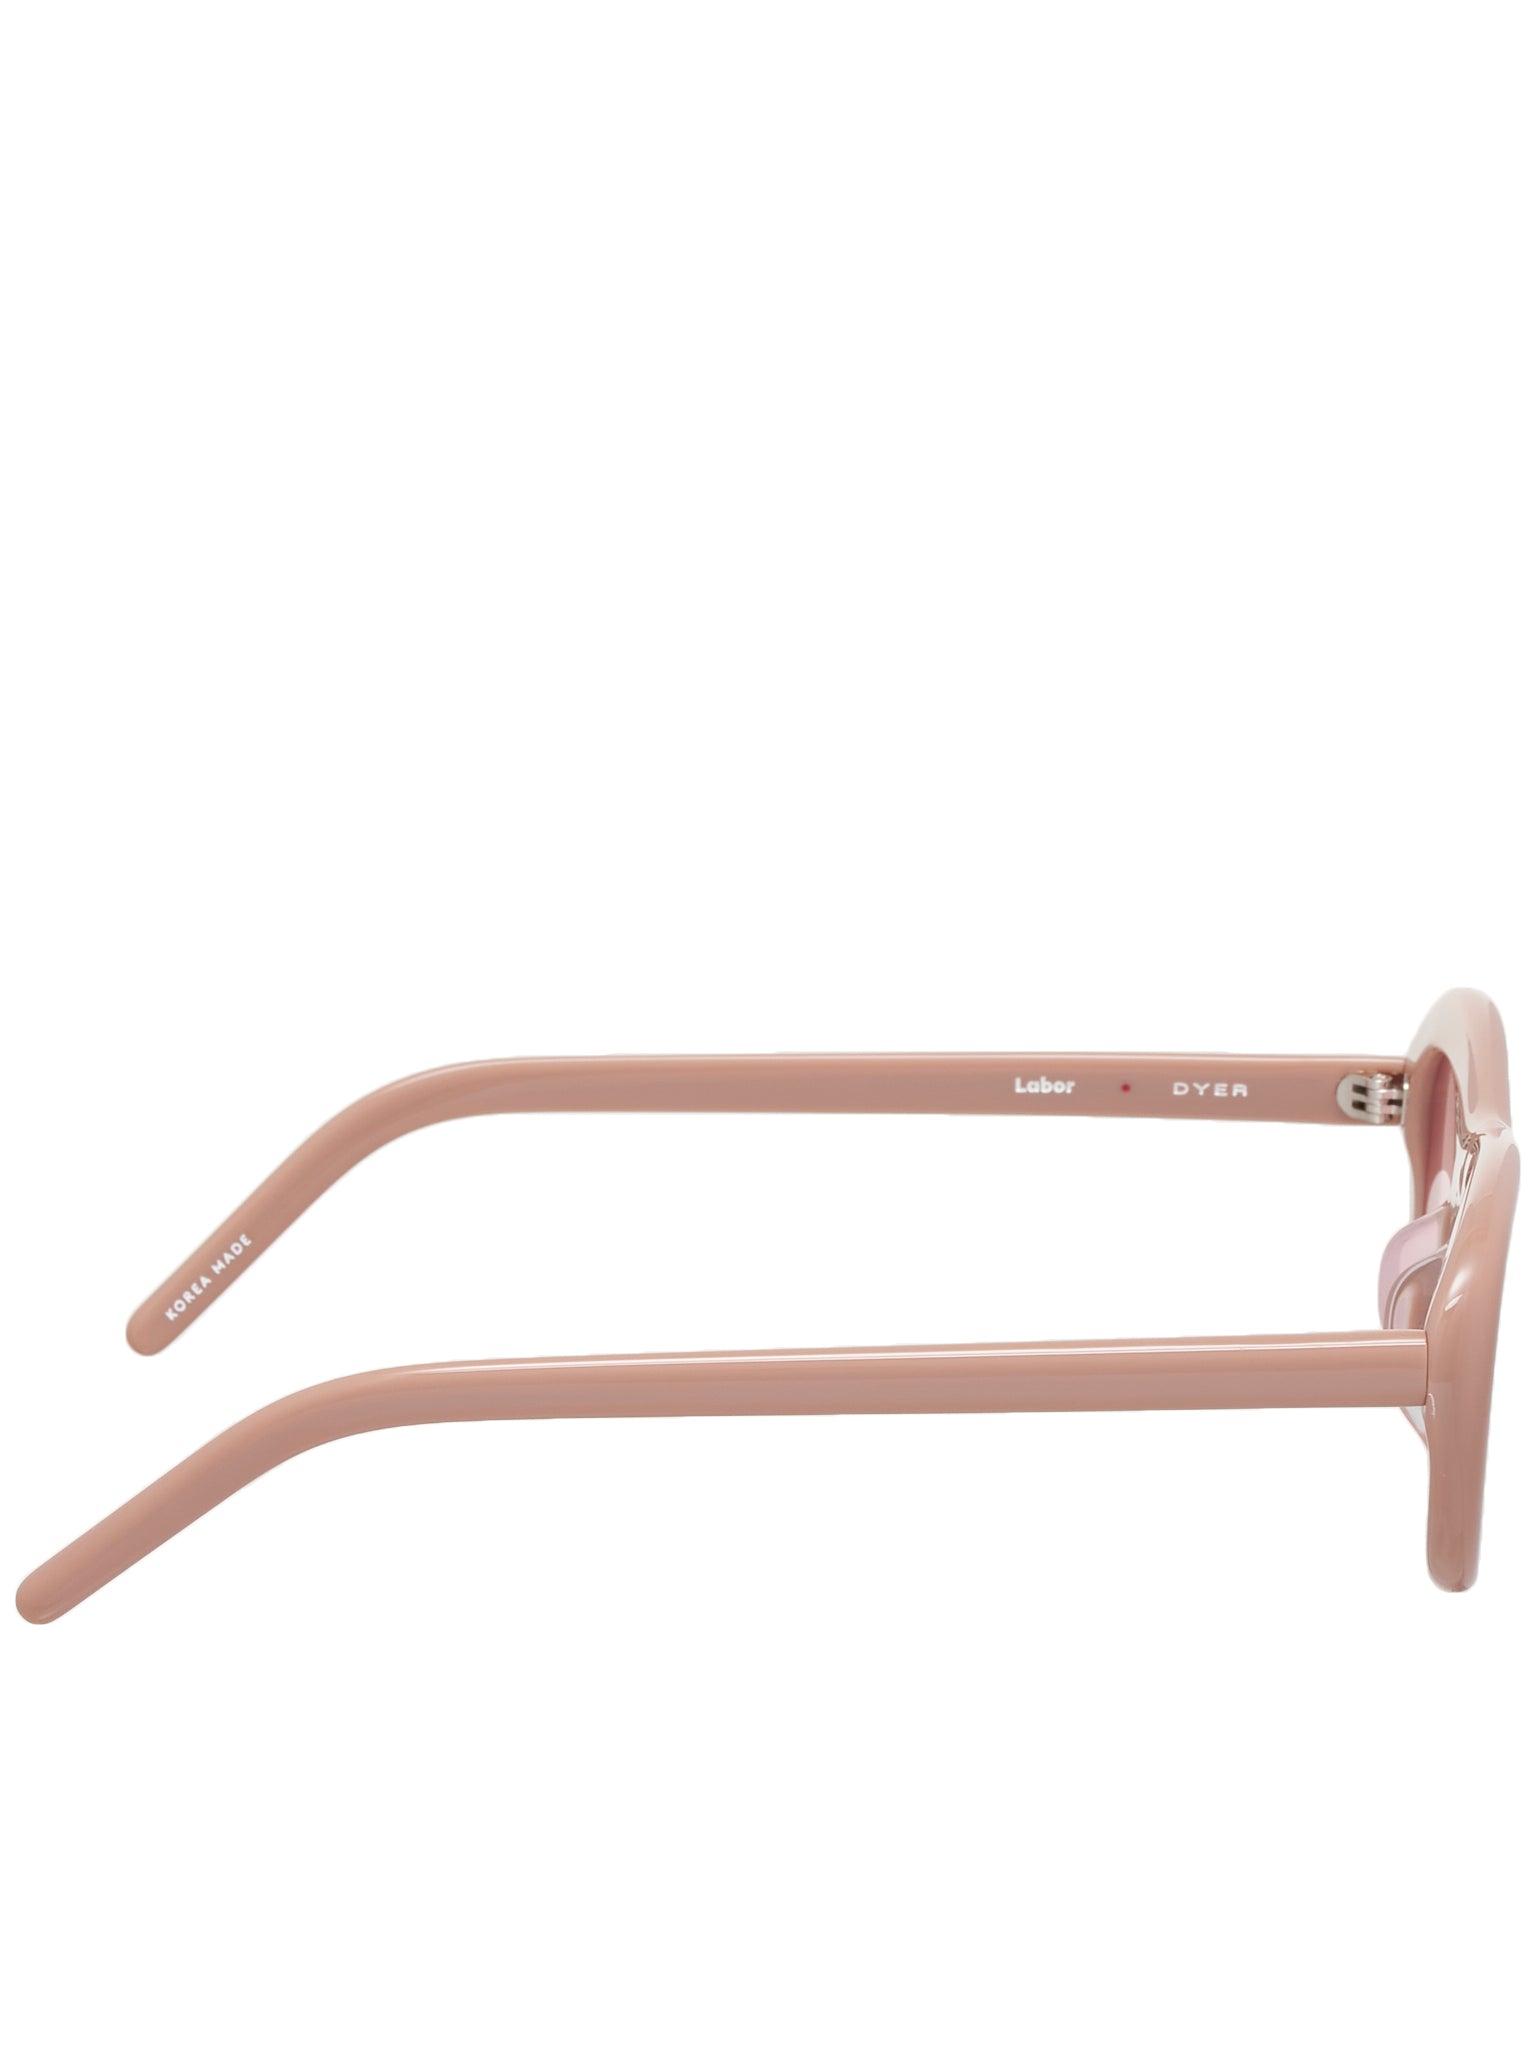 Dyer Sunglasses (DYER-PINK-PINK)